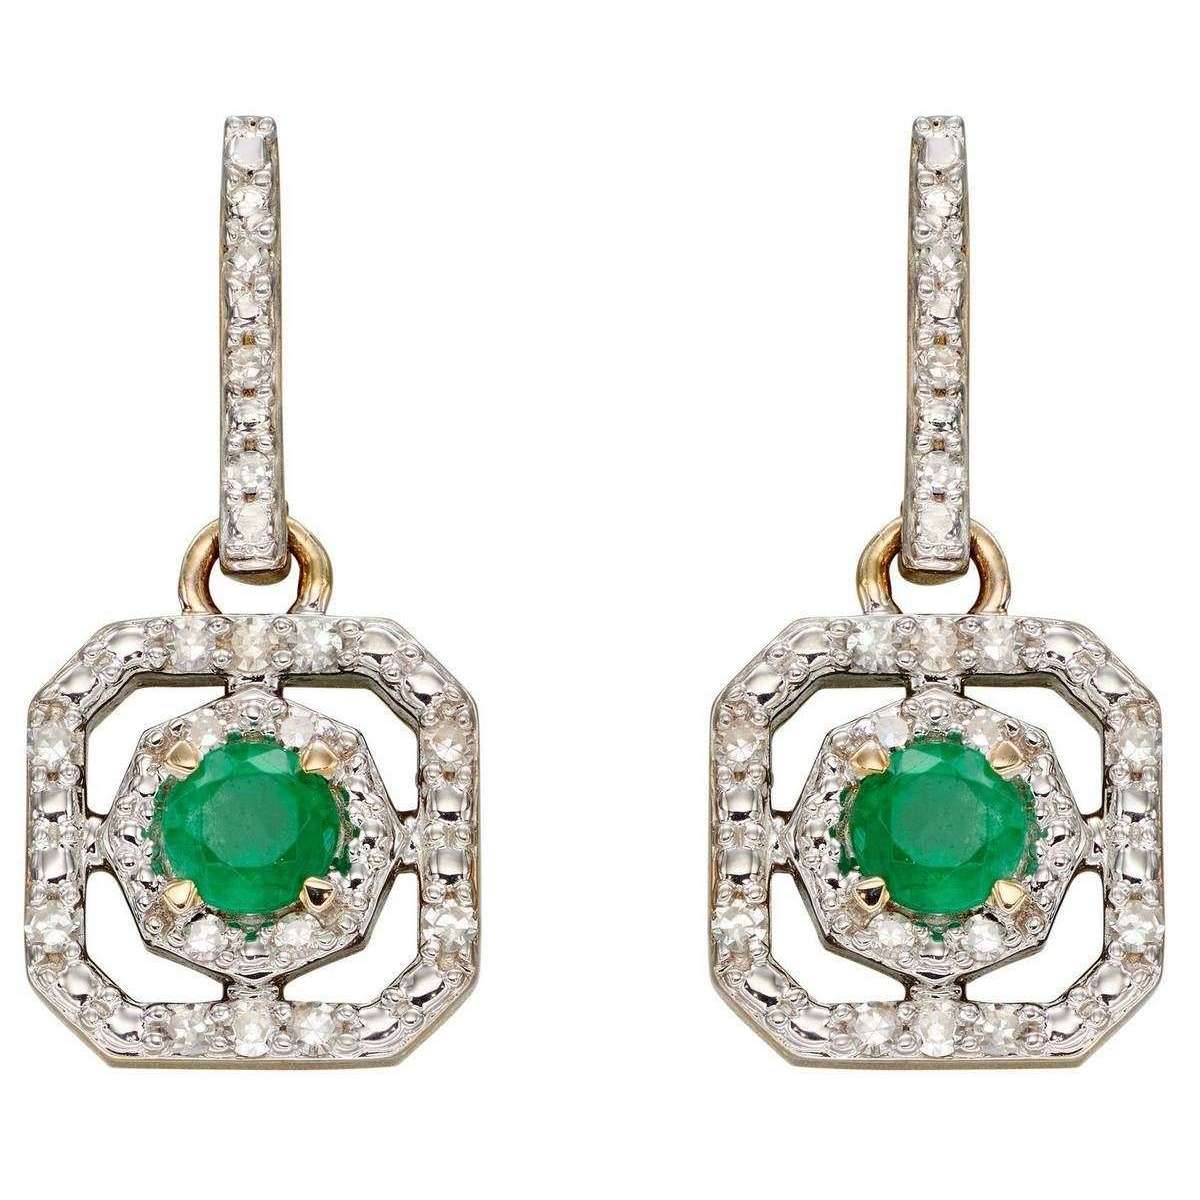 Elements Gold Emerald and Dimond Art Deco Earrings - Gold/Clear/Green